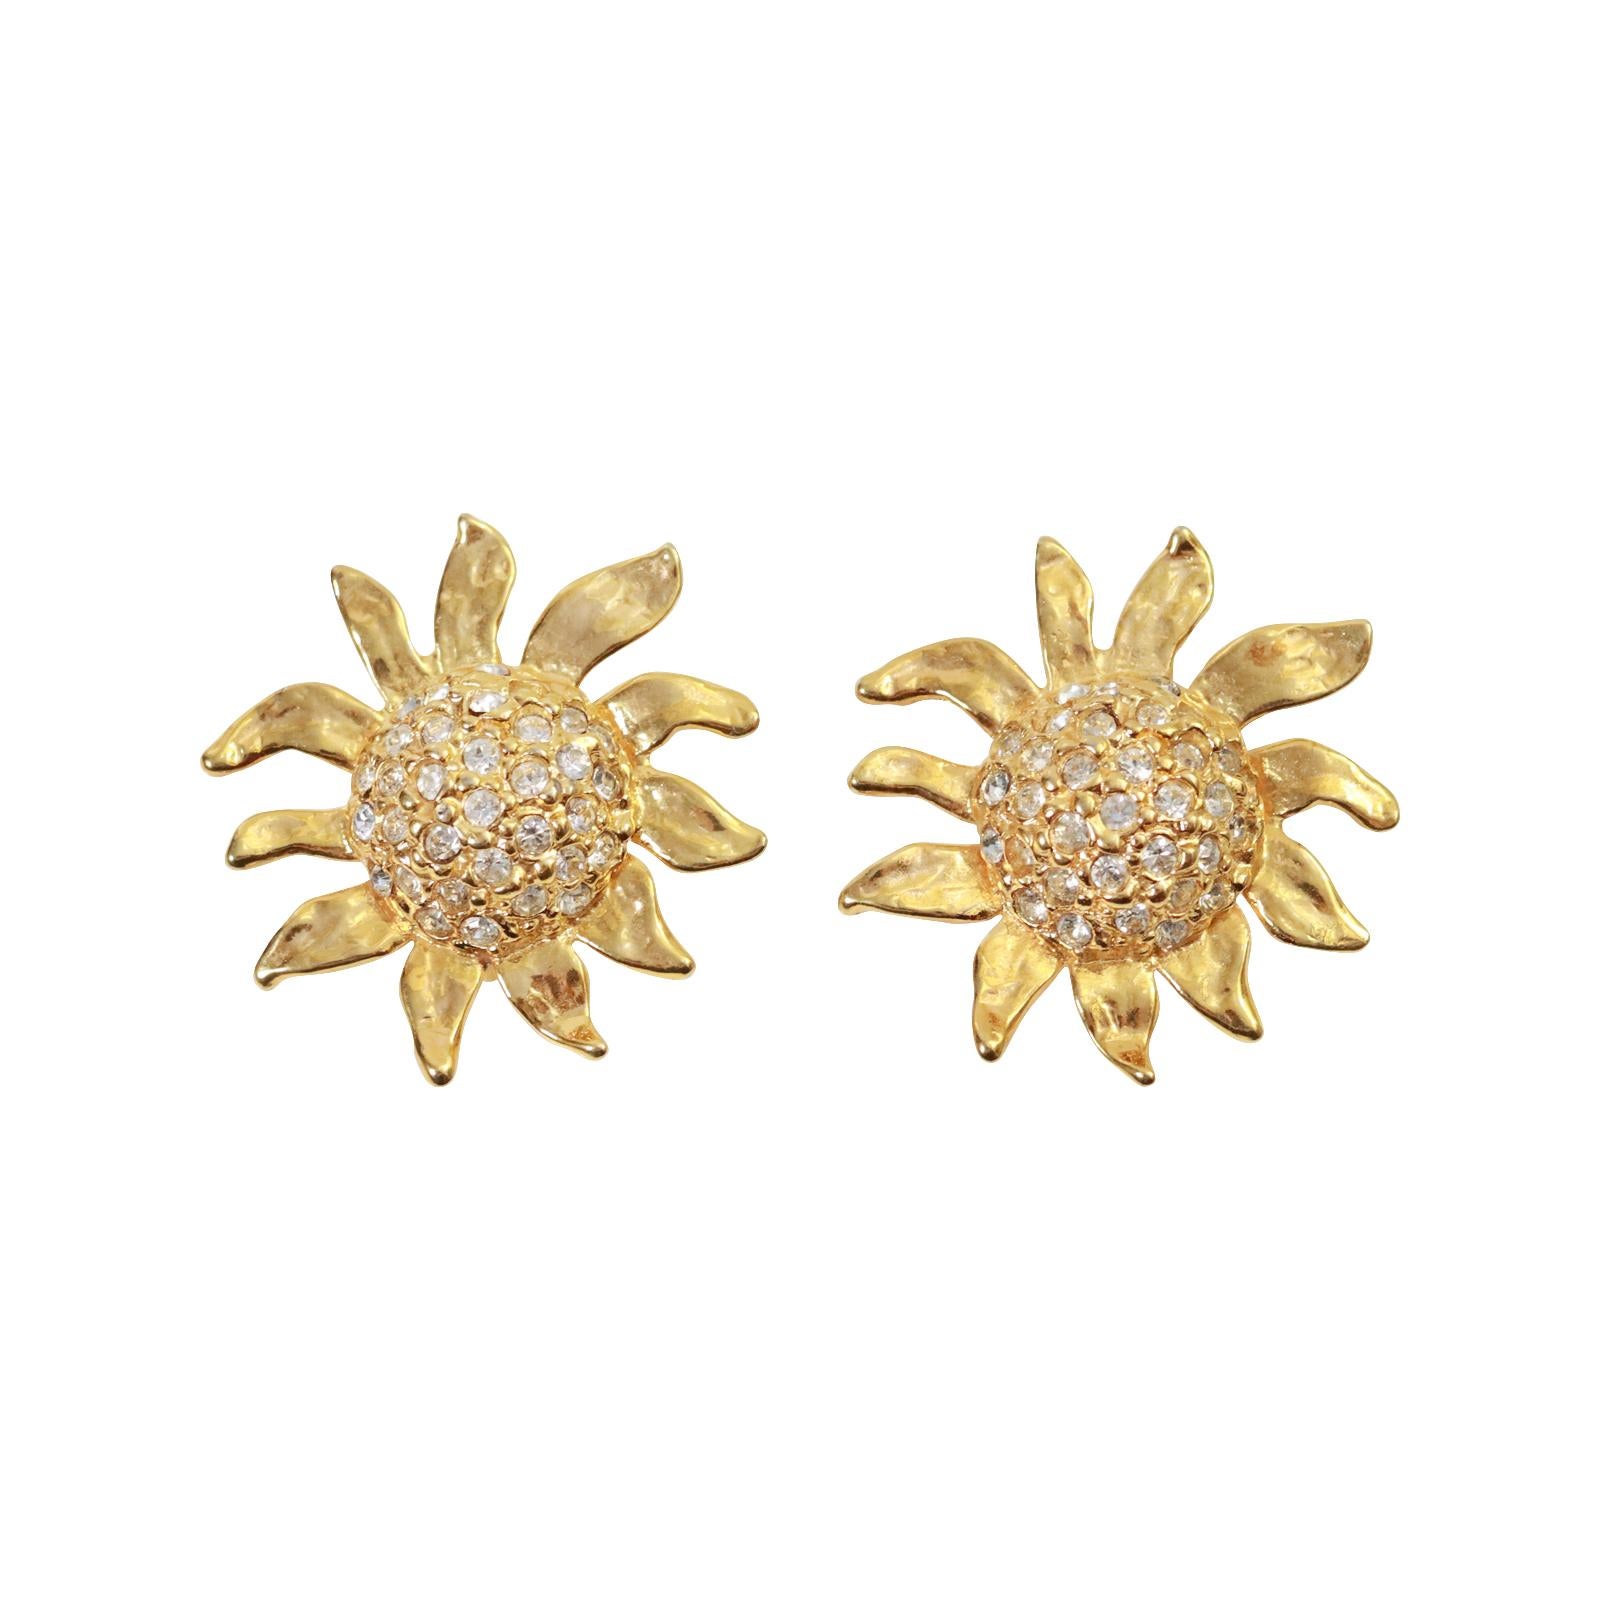 Vintage Gold Tone and Diamante Sun Flower Earrings, Circa 1980's. These are well made and substantial earrings The earrings have a dome of the diamante in the center. All the petals are free form and going various directions to create the perfect